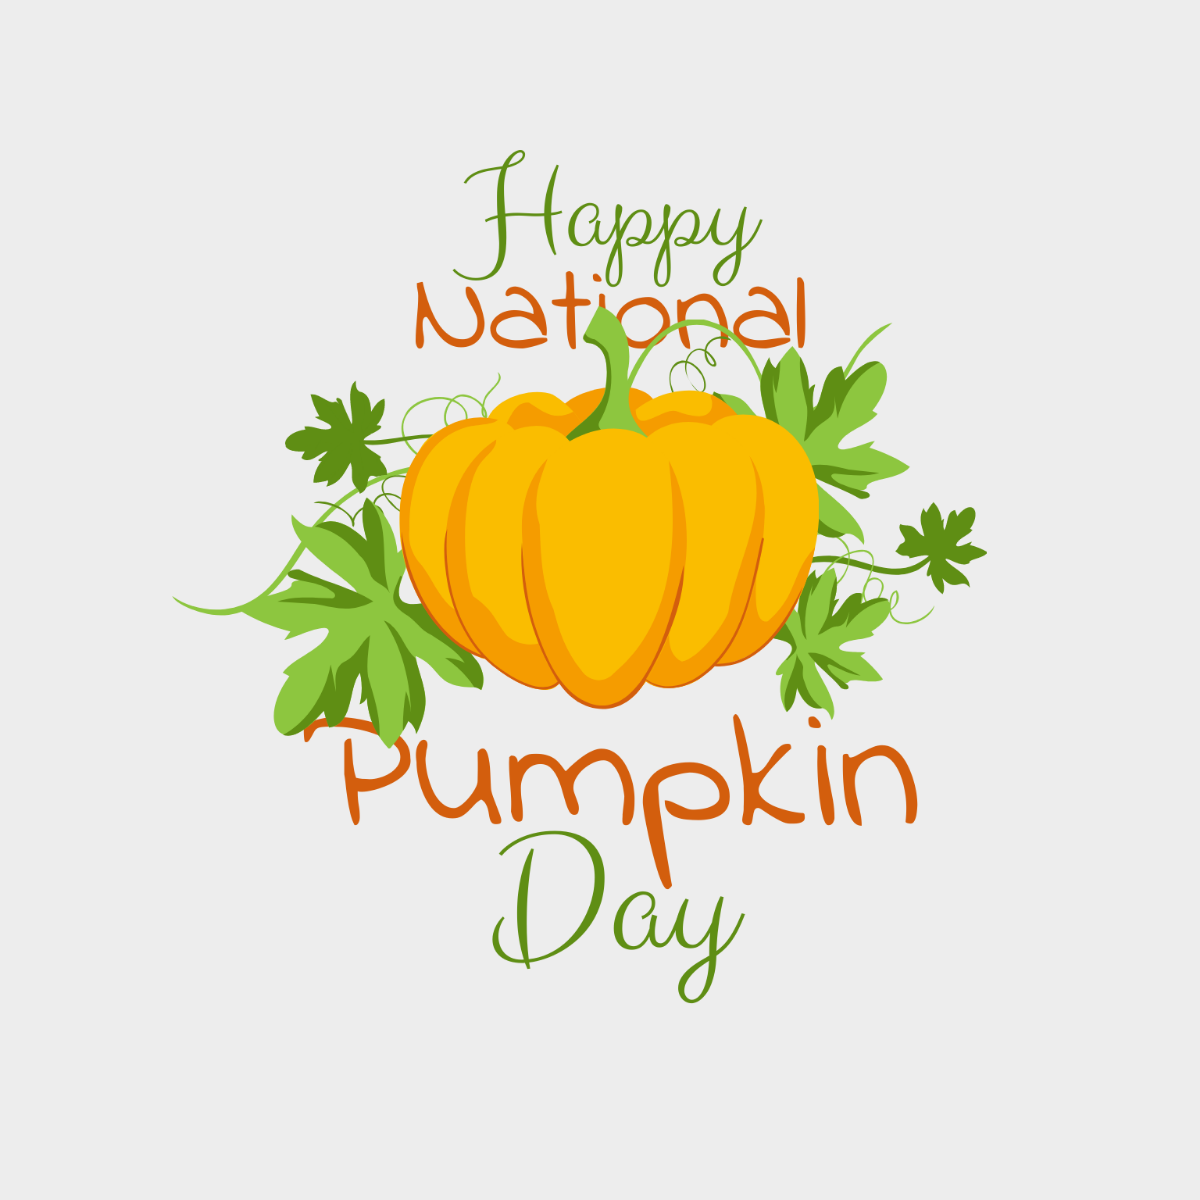 Happy National Pumpkin Day Illustration Template